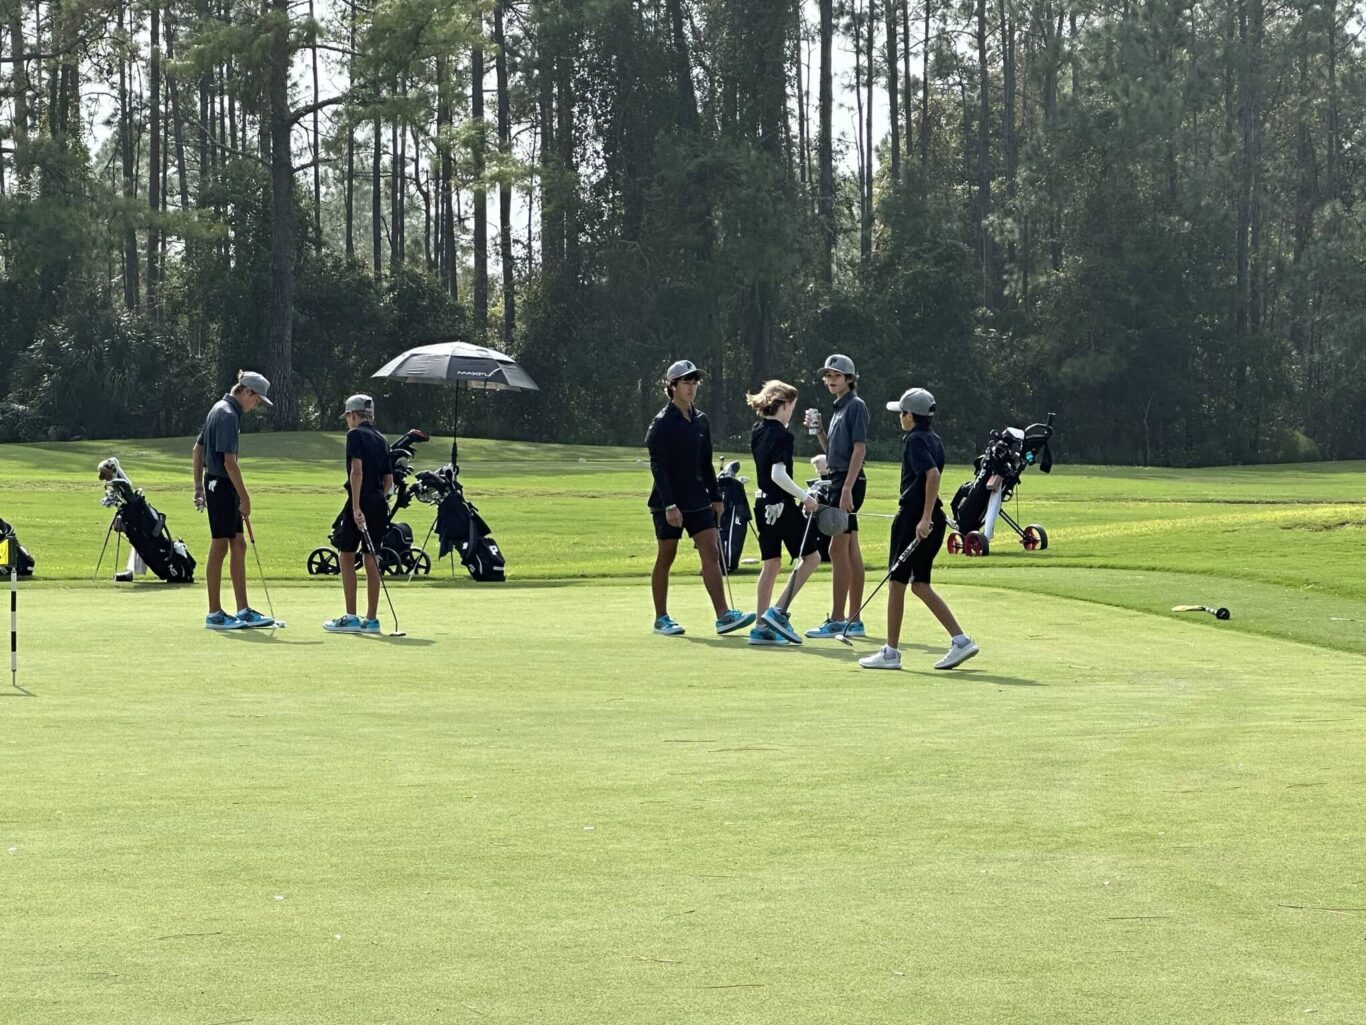 A group of boys standing on a golf course.